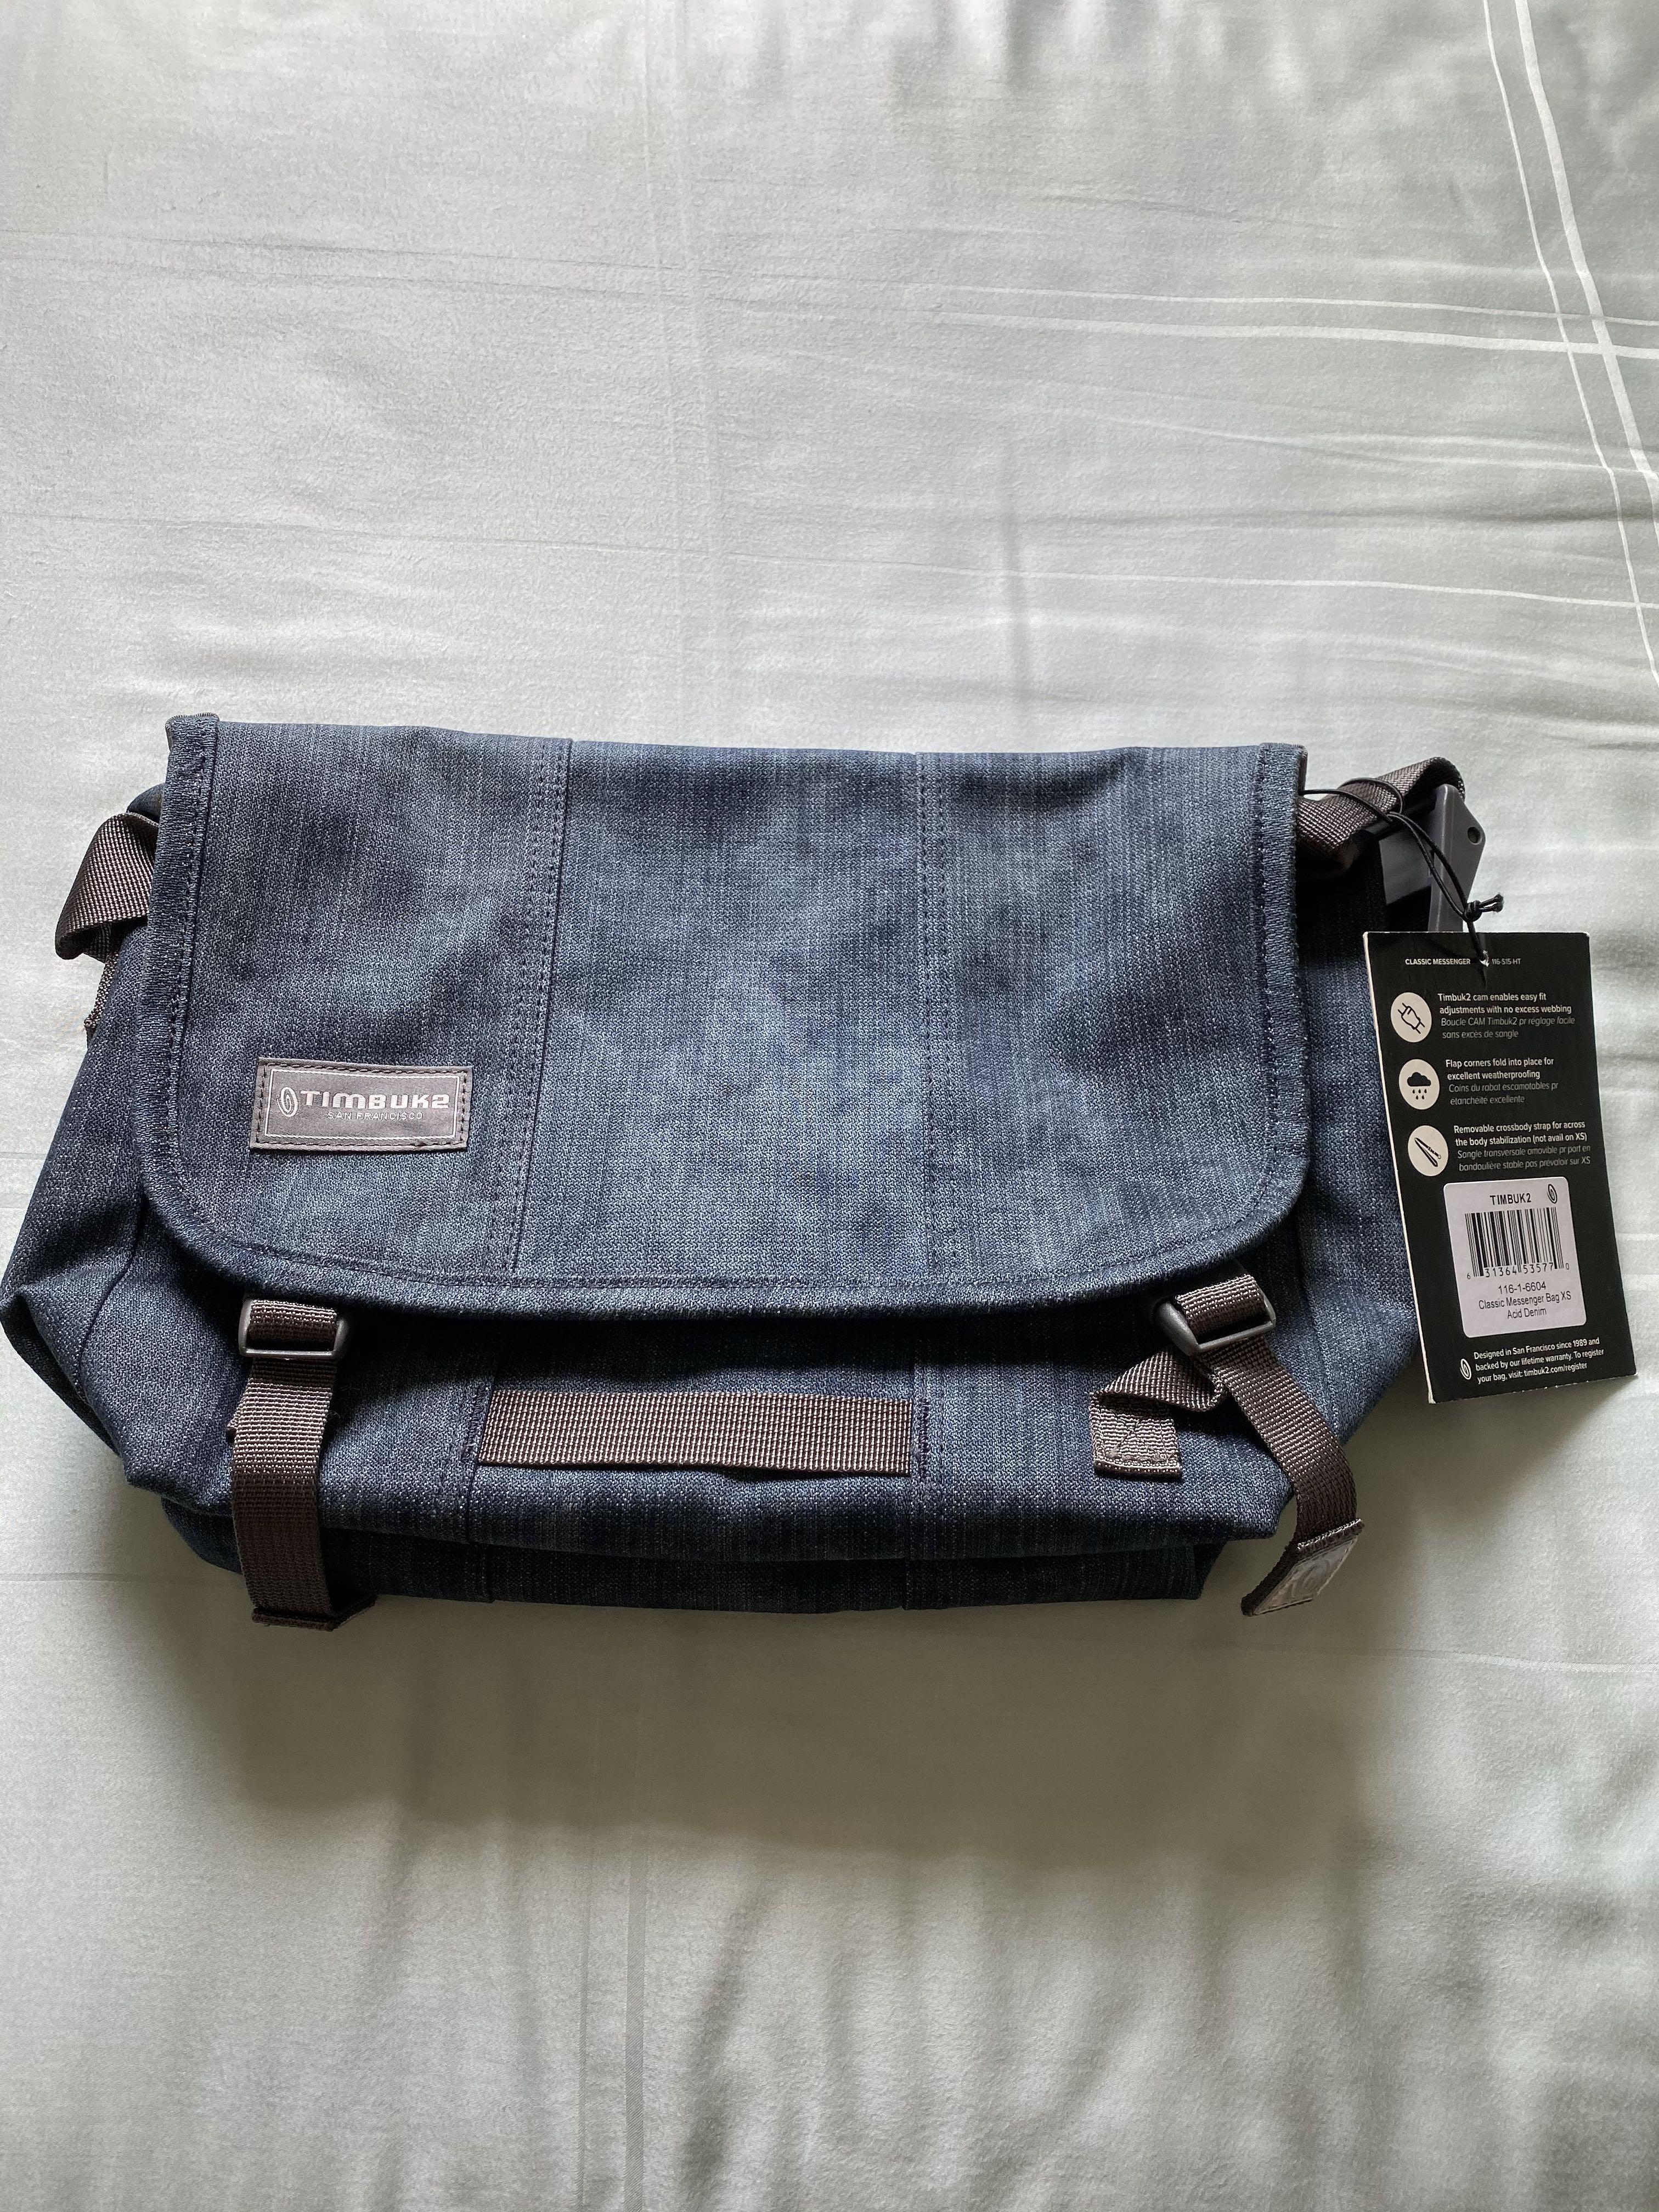 Timbuk2 Classic Messenger Bag Xs Women S Fashion Bags Wallets Sling Bags On Carousell